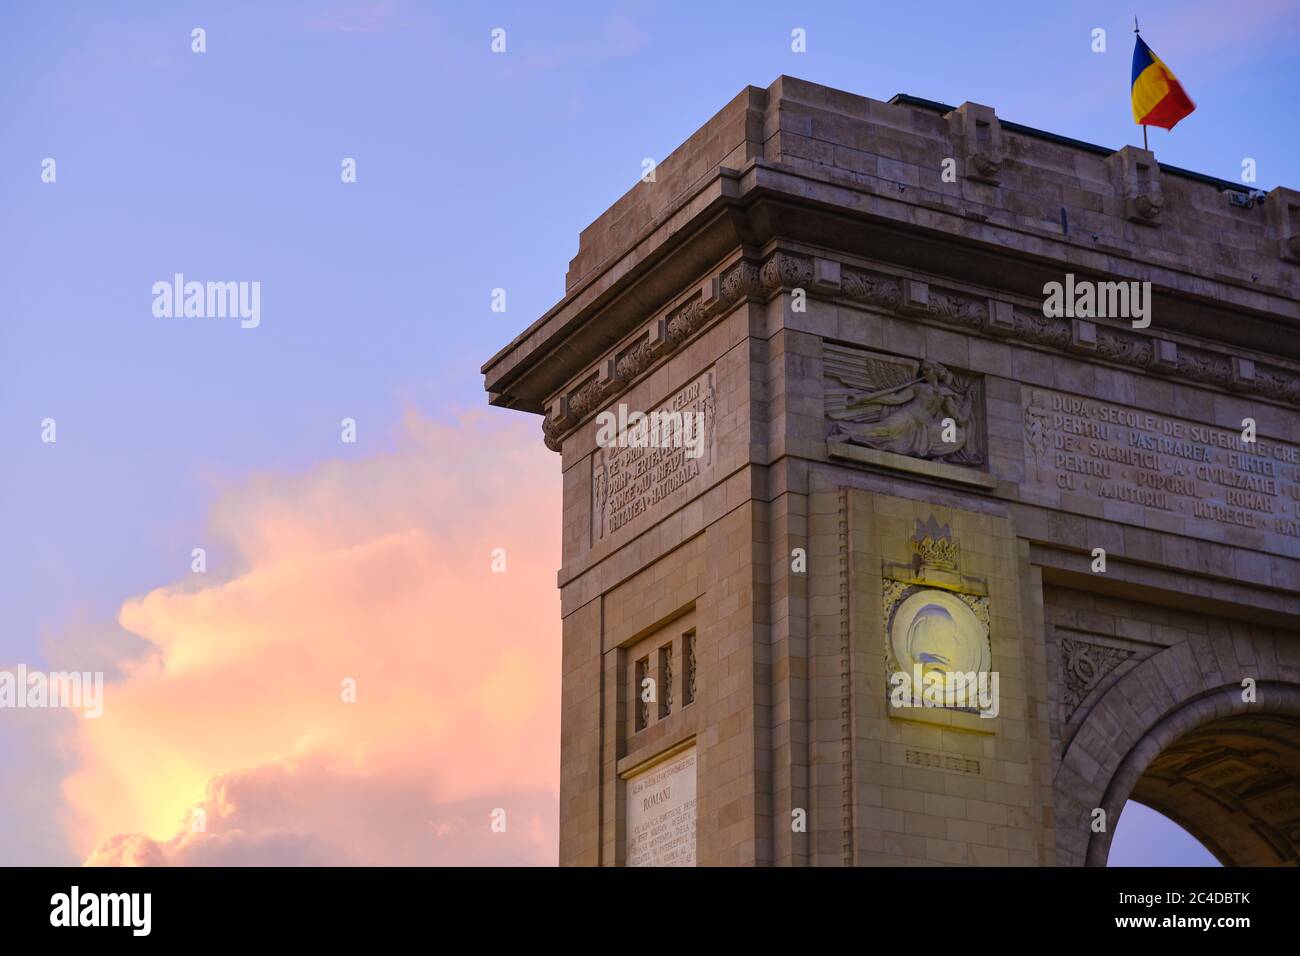 A corner of the Arch of Triumph in Bucharest, Romania, during a sunset with pink and orange clouds. Main touristic landmark, sightseeing spot. Stock Photo